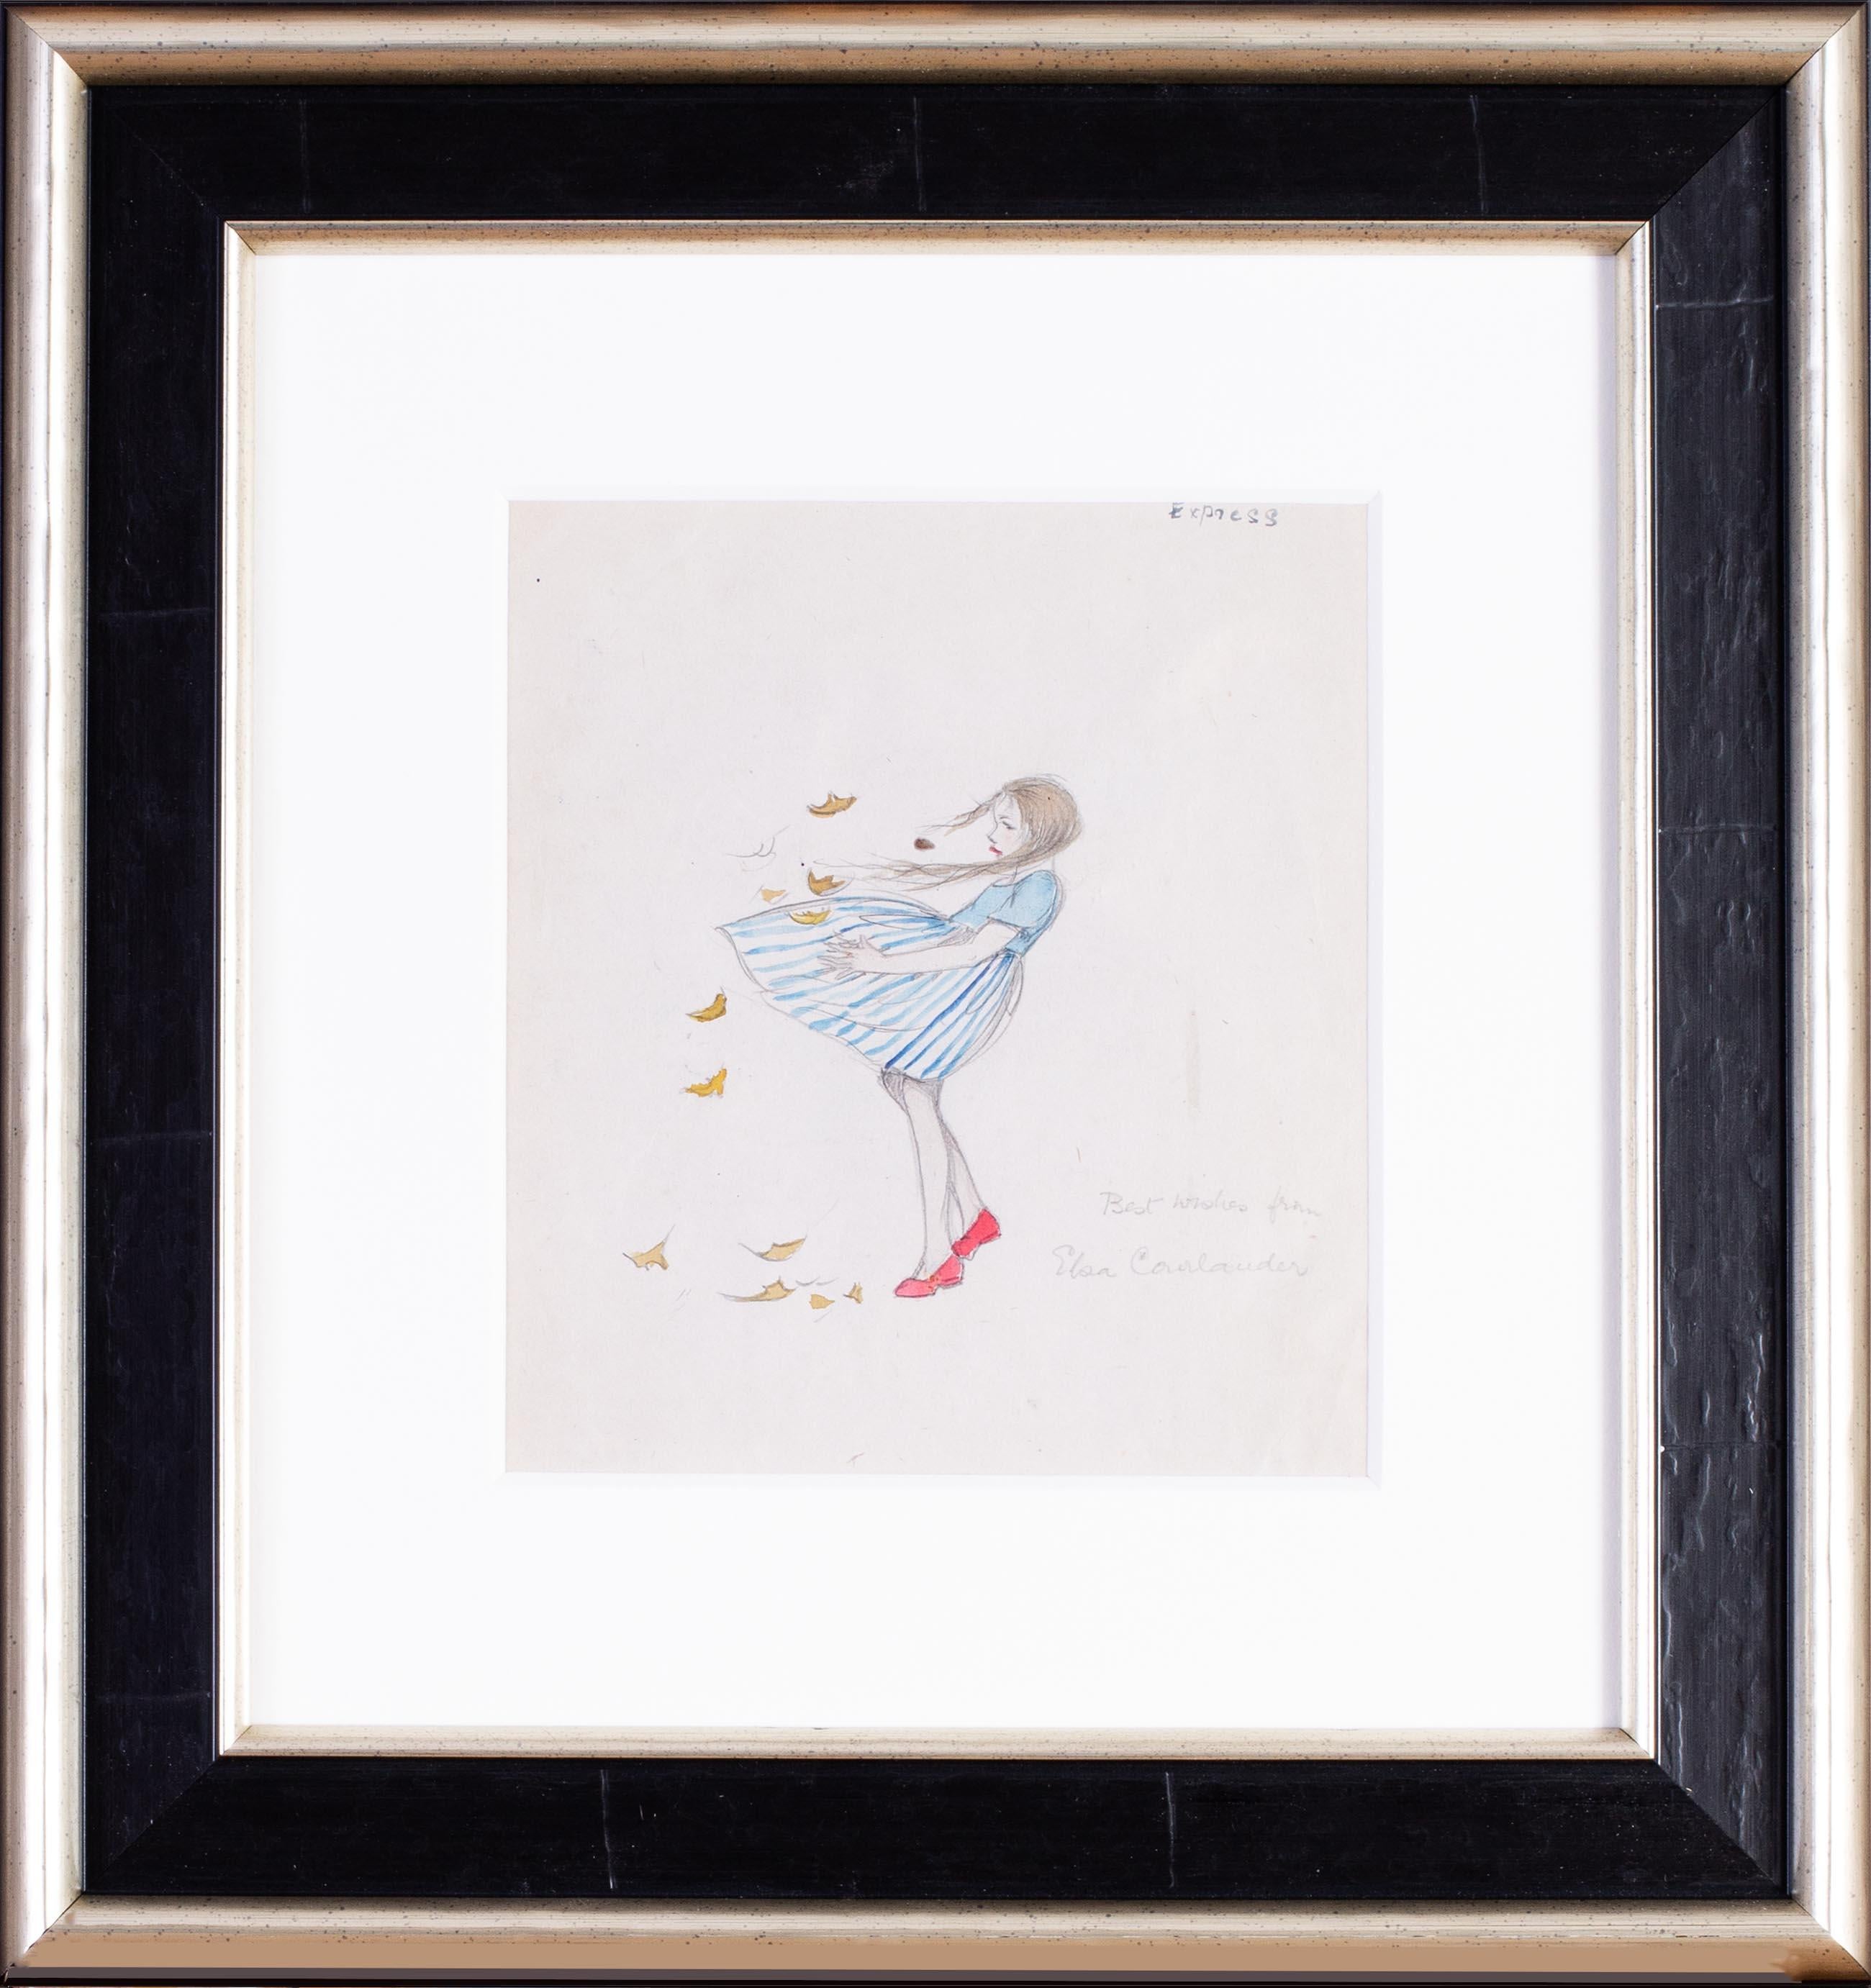 A 1930s drawing of a young girl in a blustery windy day with autumn leaves